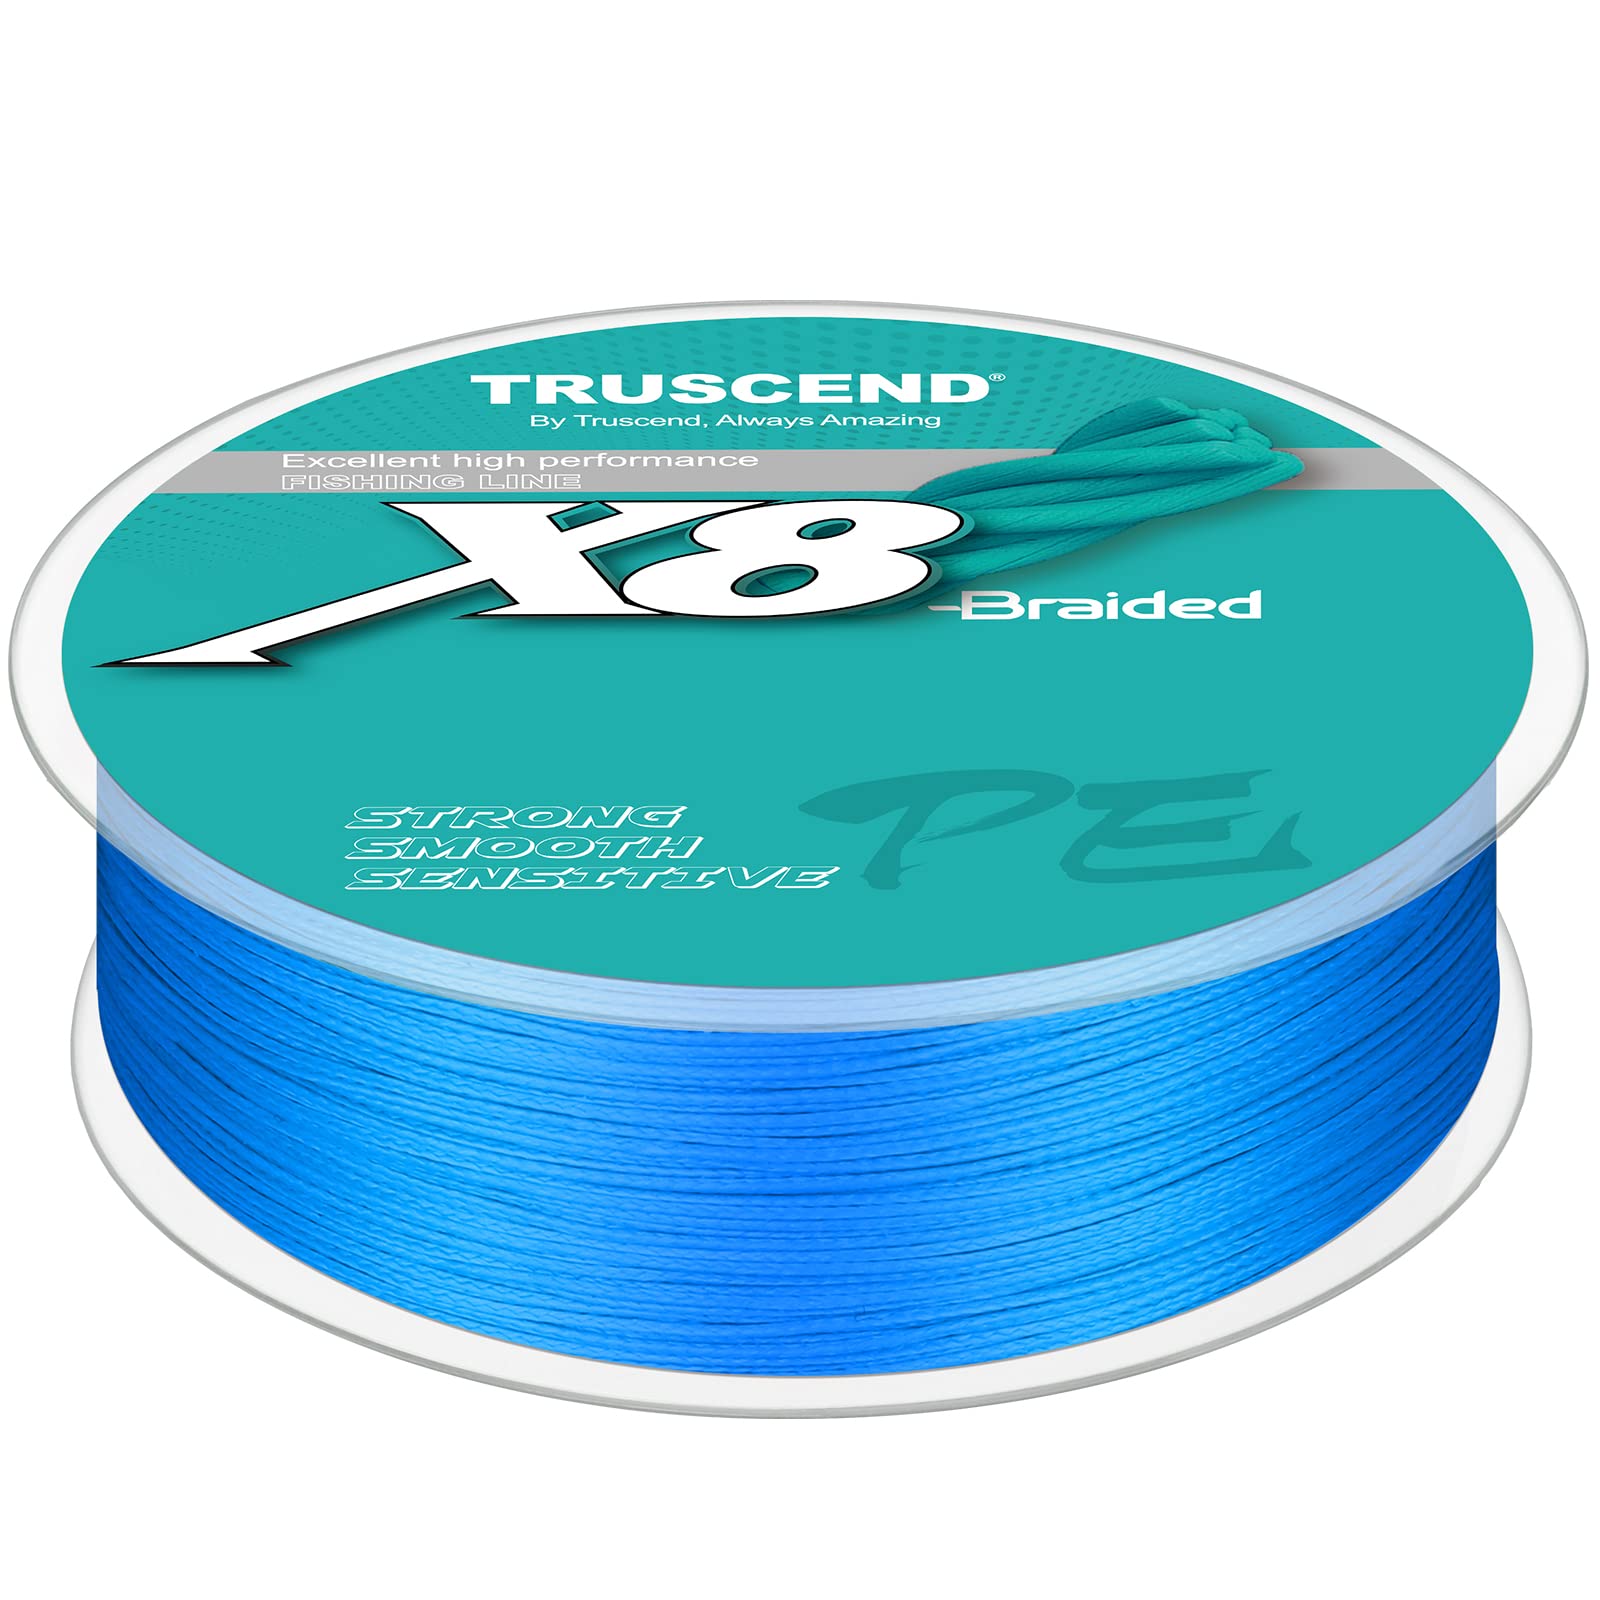 TRUSCEND X8 Pro Grade Tournament Braided Fishing Line, Ultra Thin & More  Power, Sensitive, Precise Cast, Softer & Smoother, Abrasion Resistant, No  Stretch, Zero Memory, by Top World OEM Manufactory 10lb/0.10mm/328yds Blue